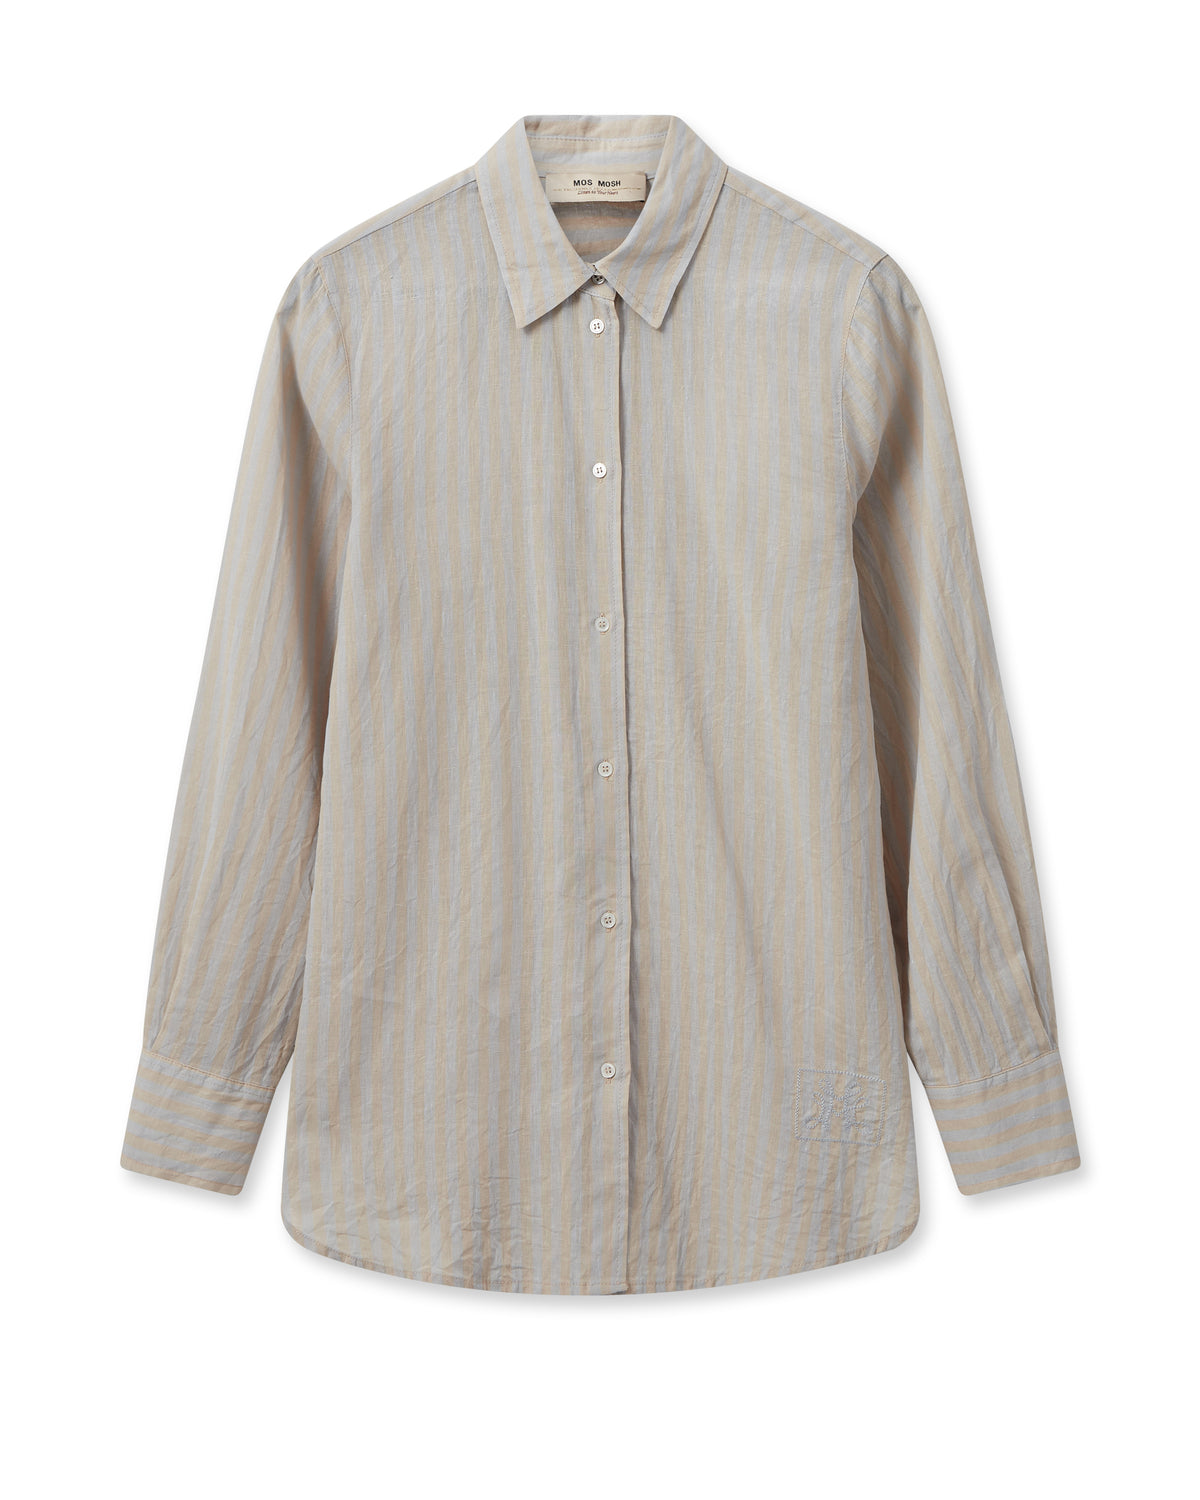 Pale stripe linen and cotton blend shirt with classic collar and long sleeves